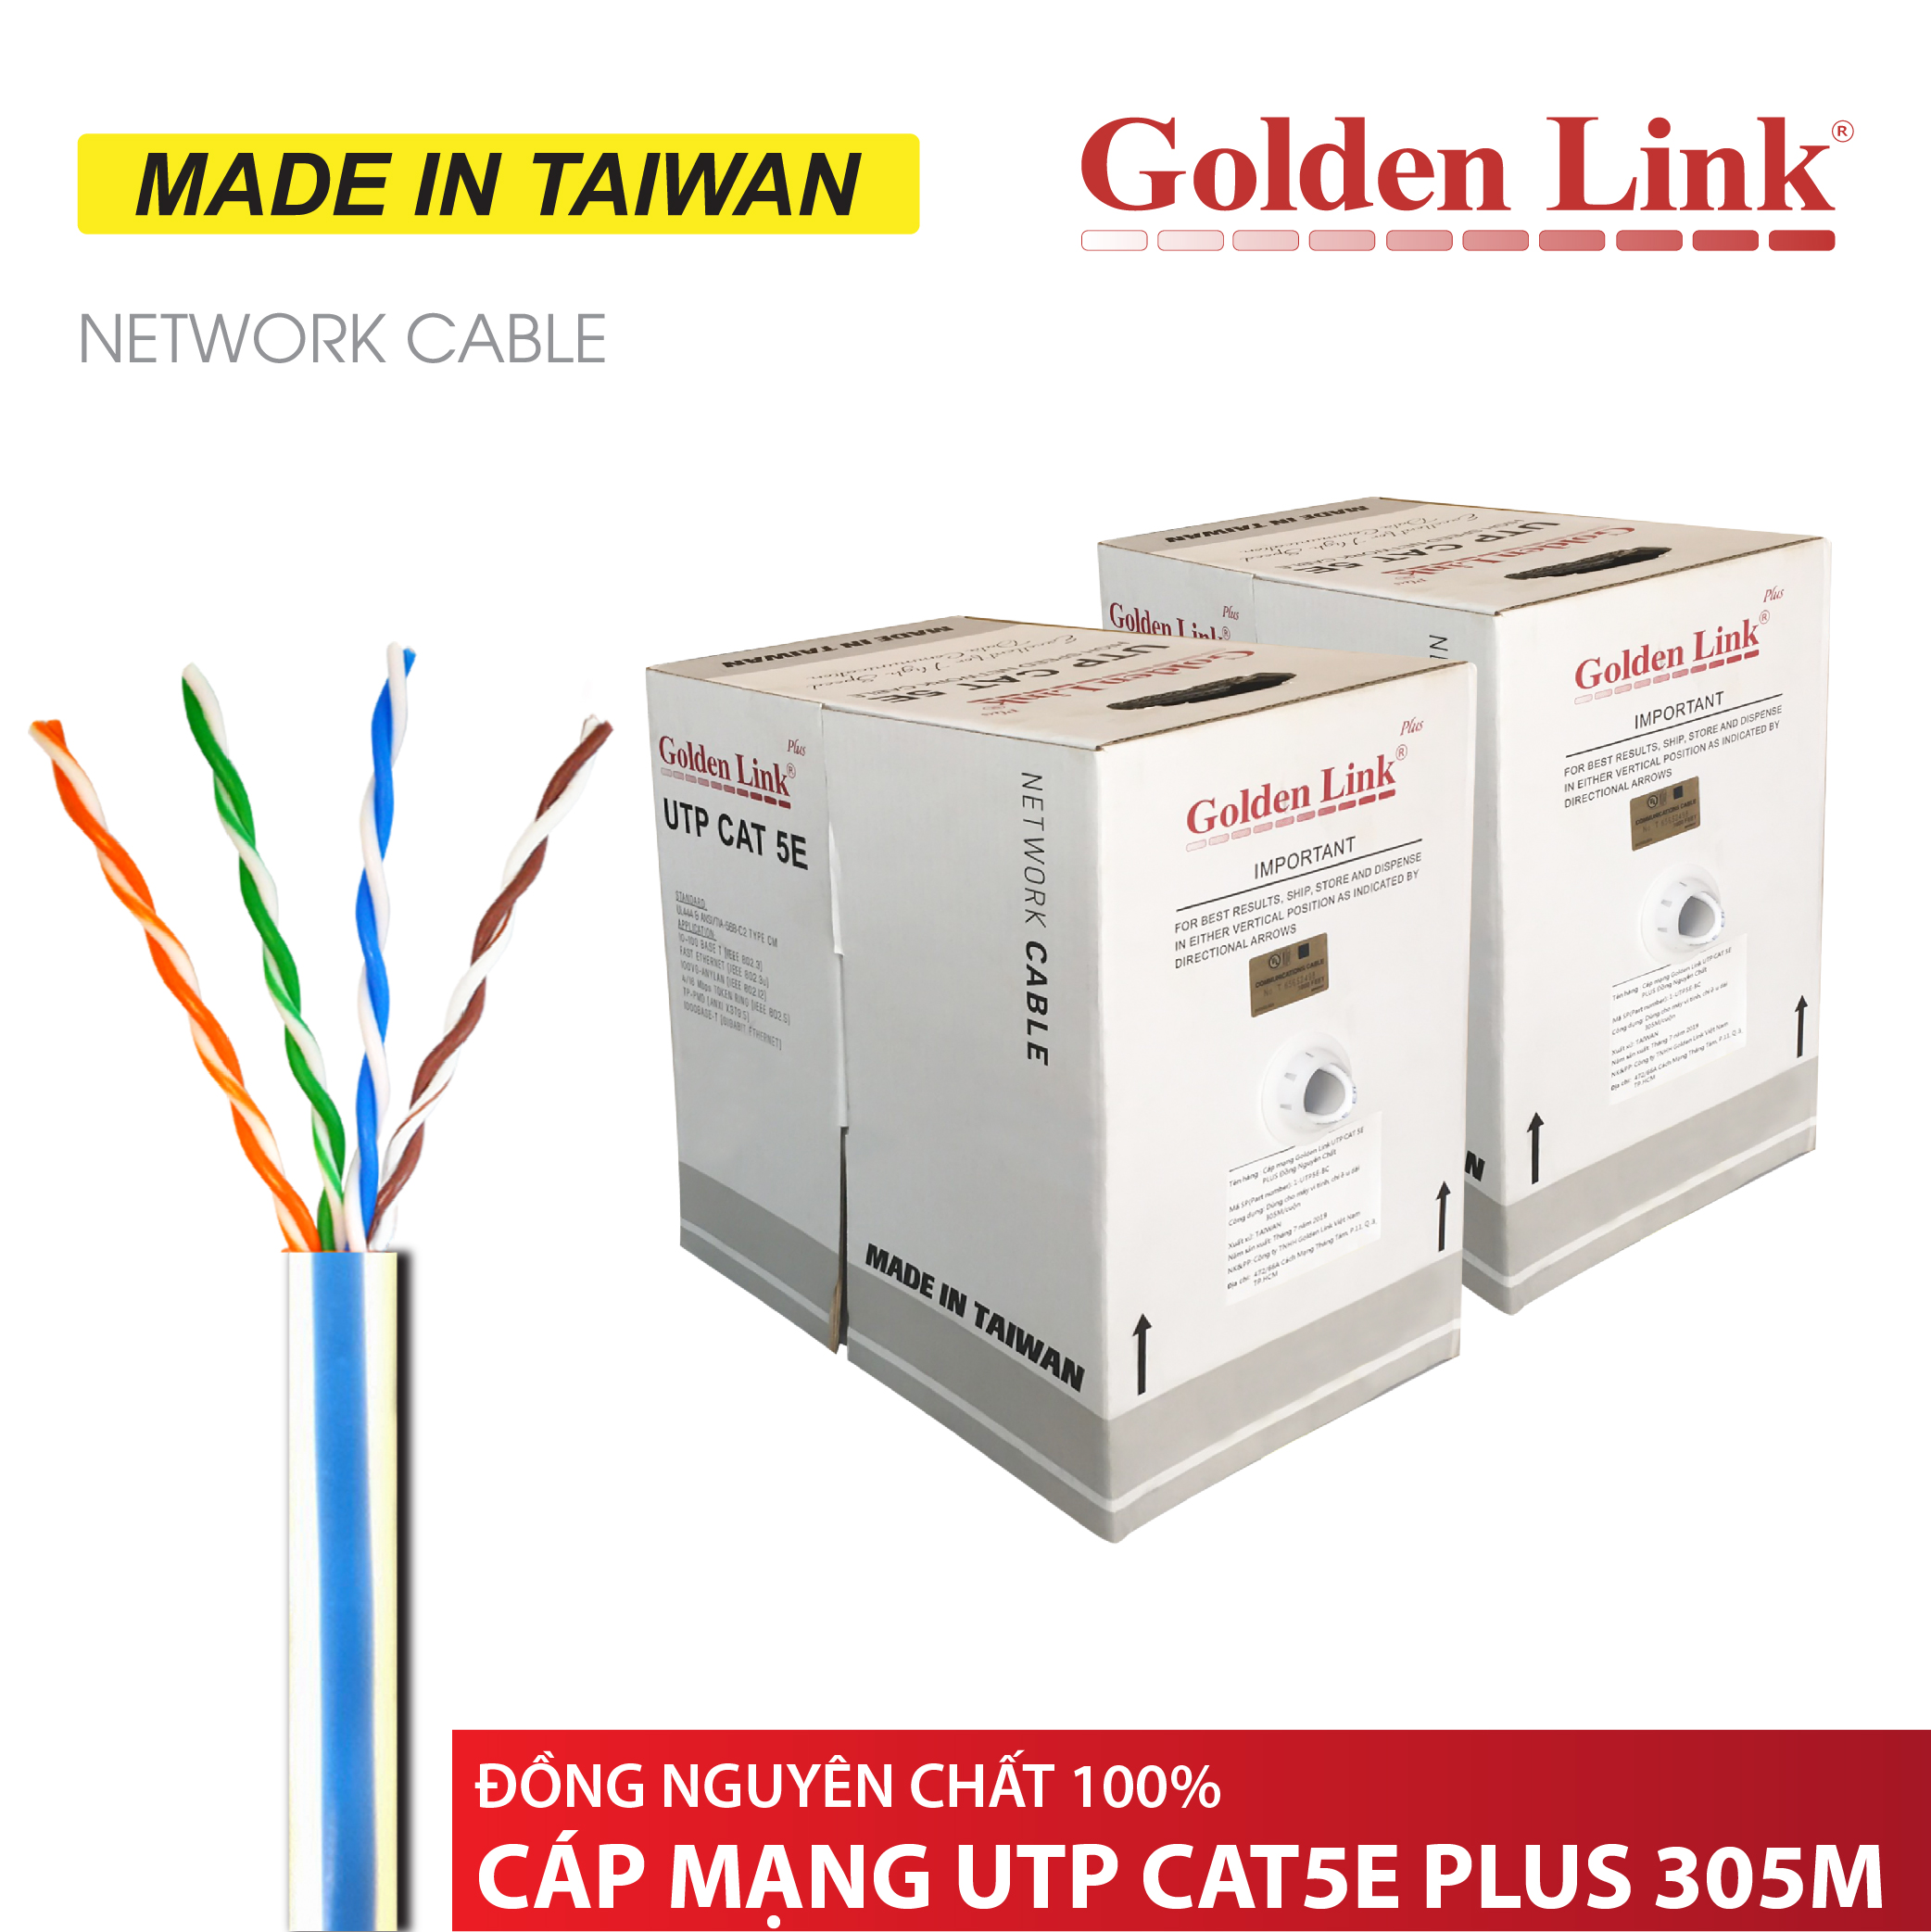 Golden Link Plus UTP CAT 5E network cable 305m Gray Made in Taiwan